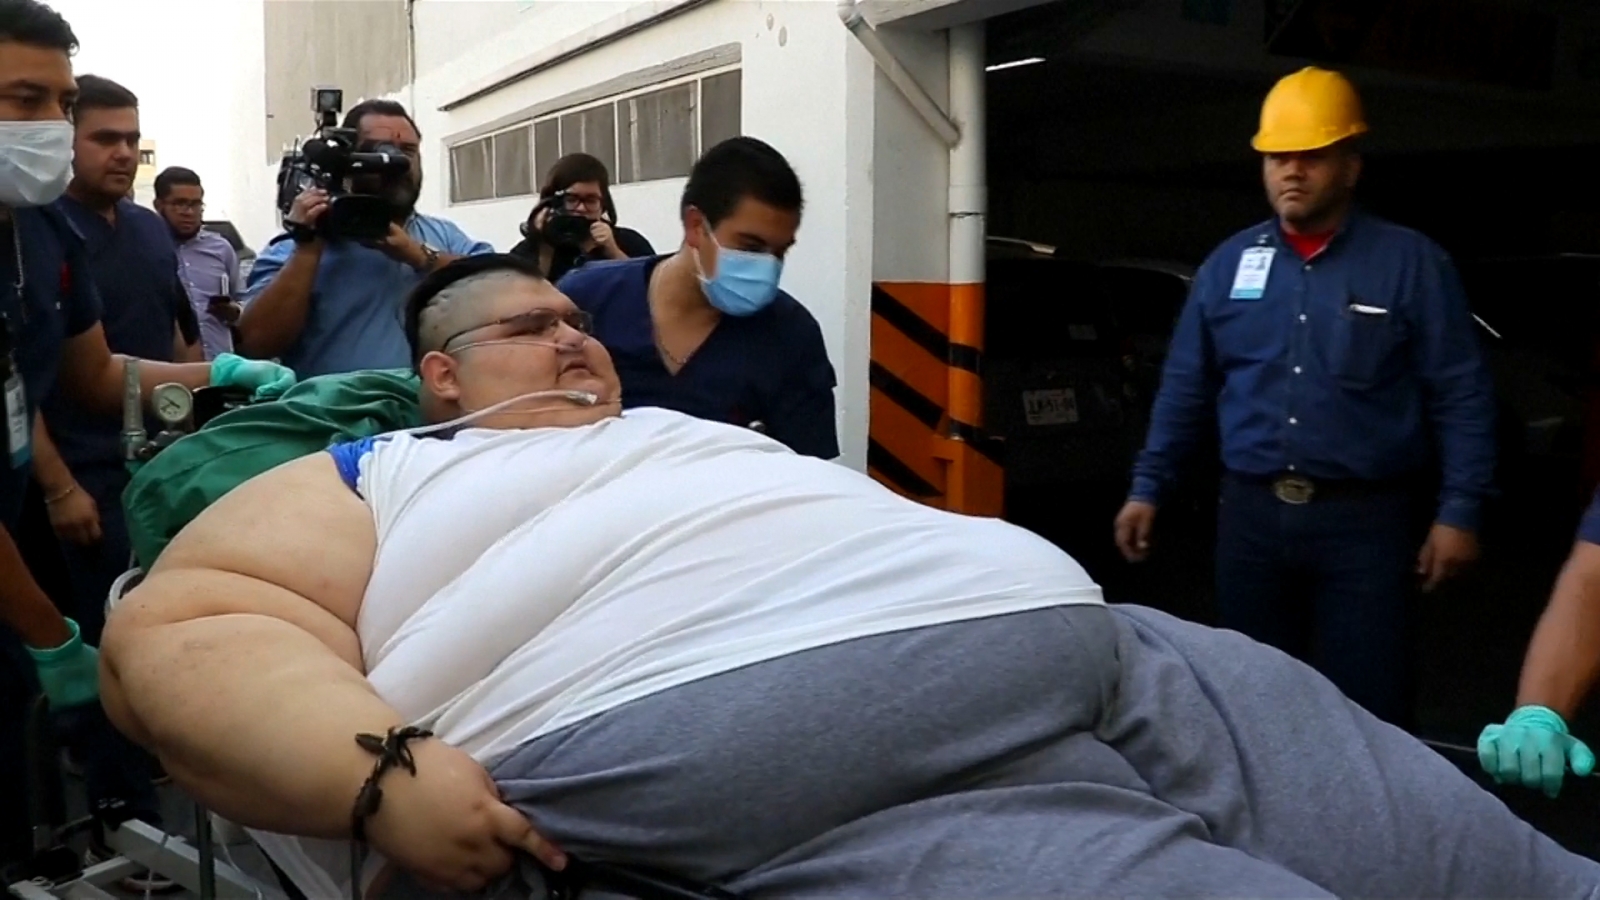 Juan Pedro Franco / Here S How The World S Fattest Man Lost 250kg And